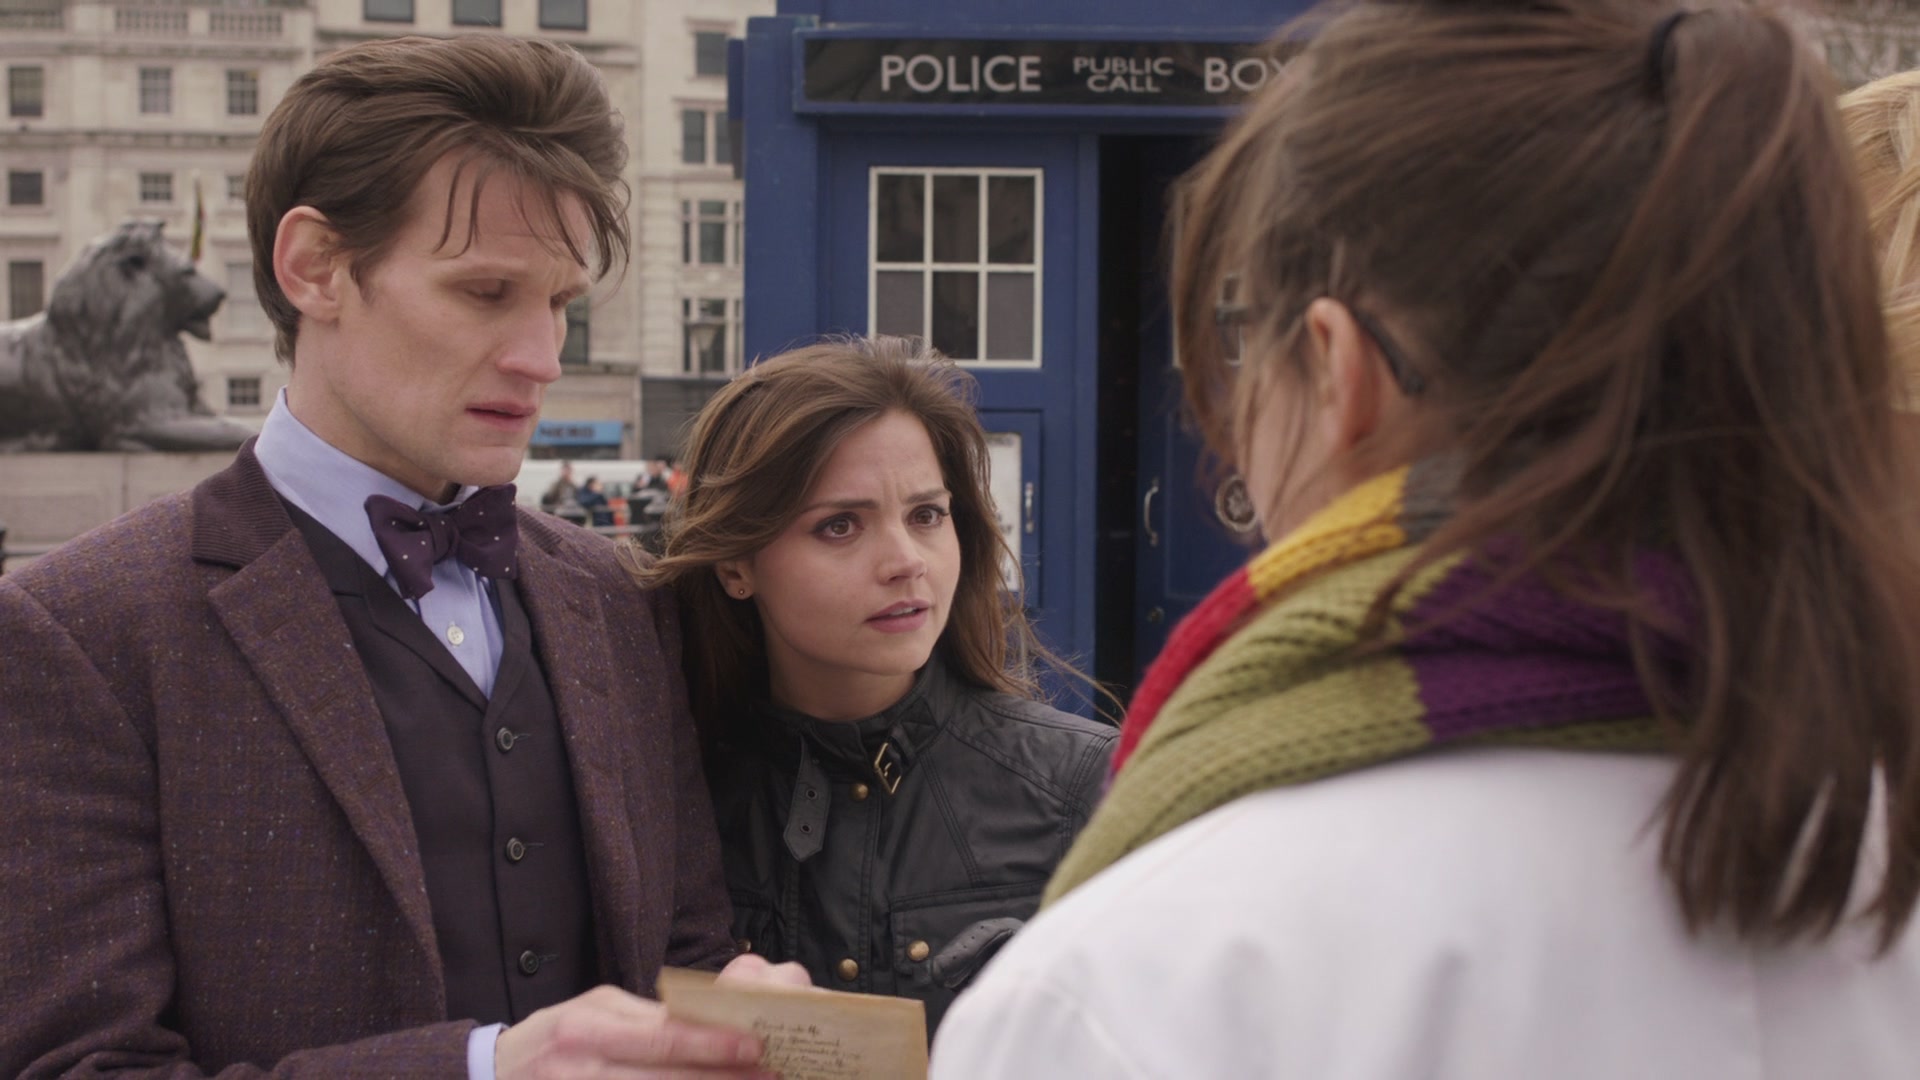 DayOfTheDoctor-Caps-0131.jpg